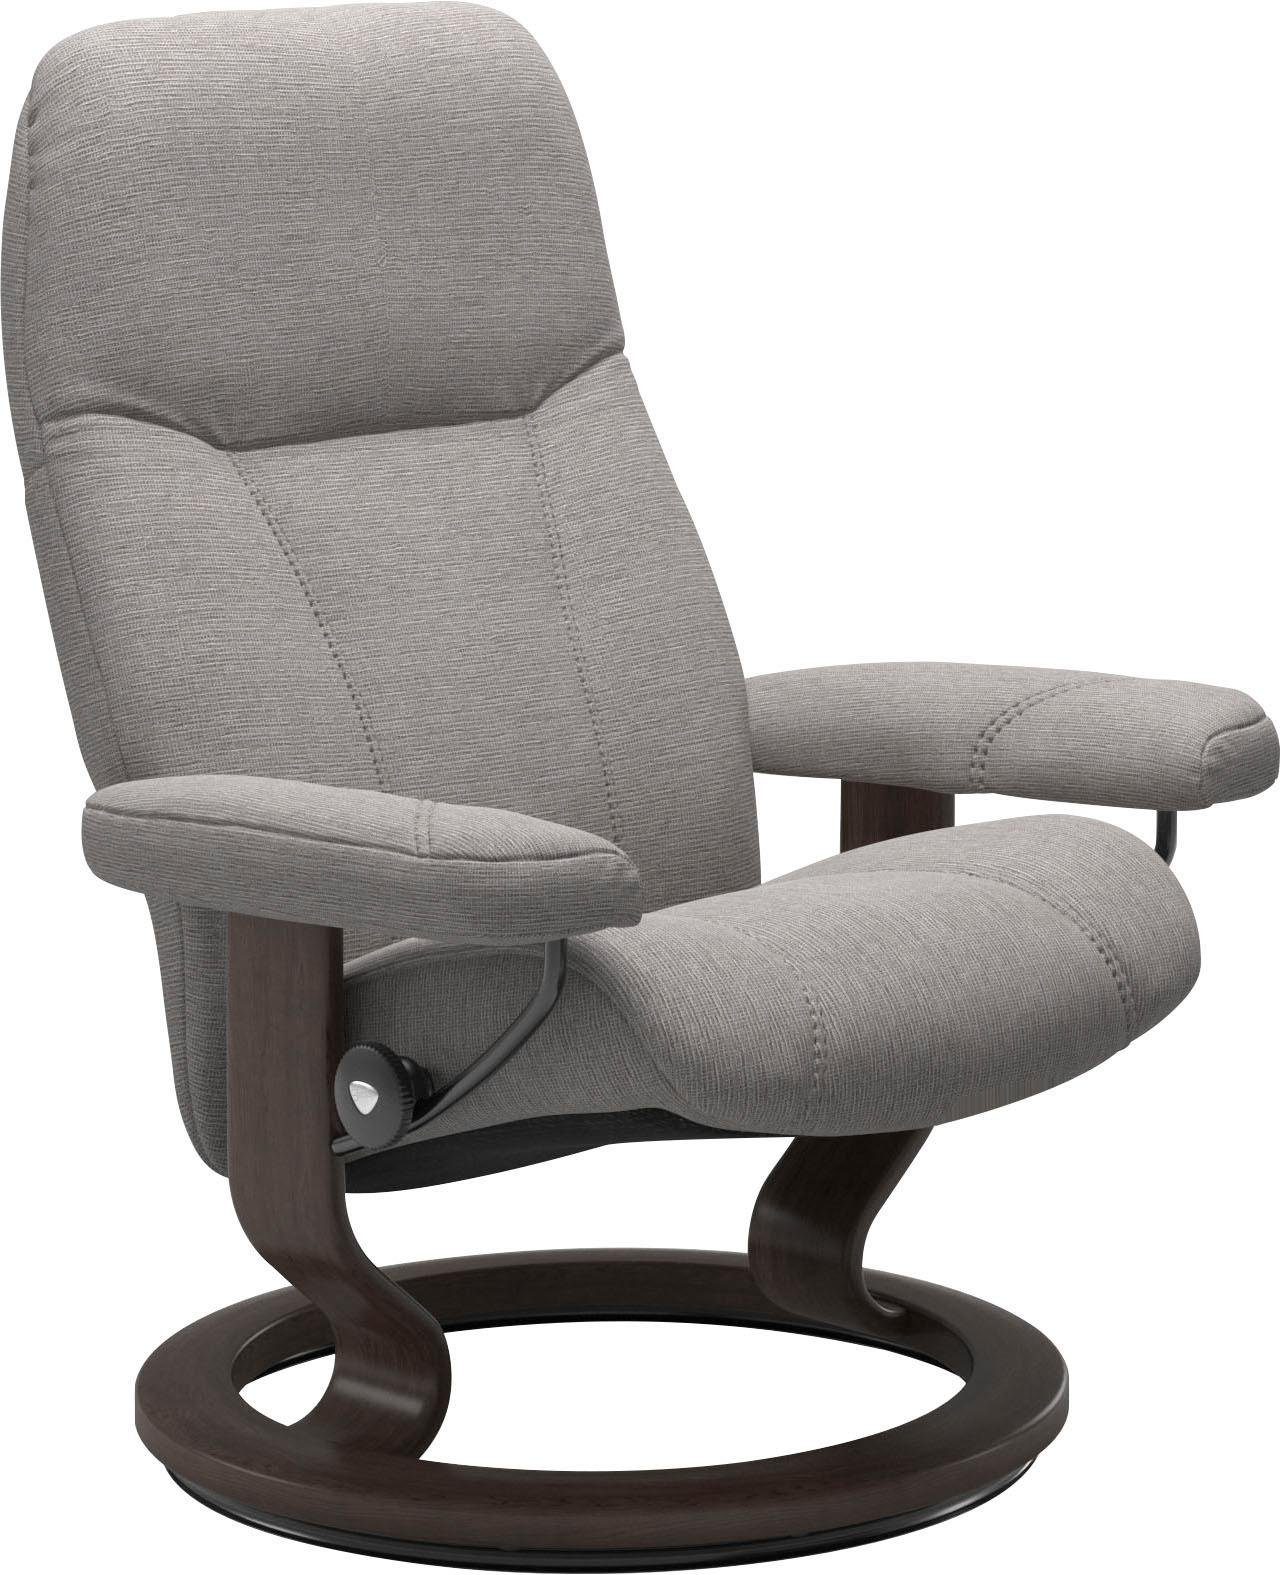 Classic Relaxsessel Größe S, Consul, mit Gestell Wenge Base, Stressless®